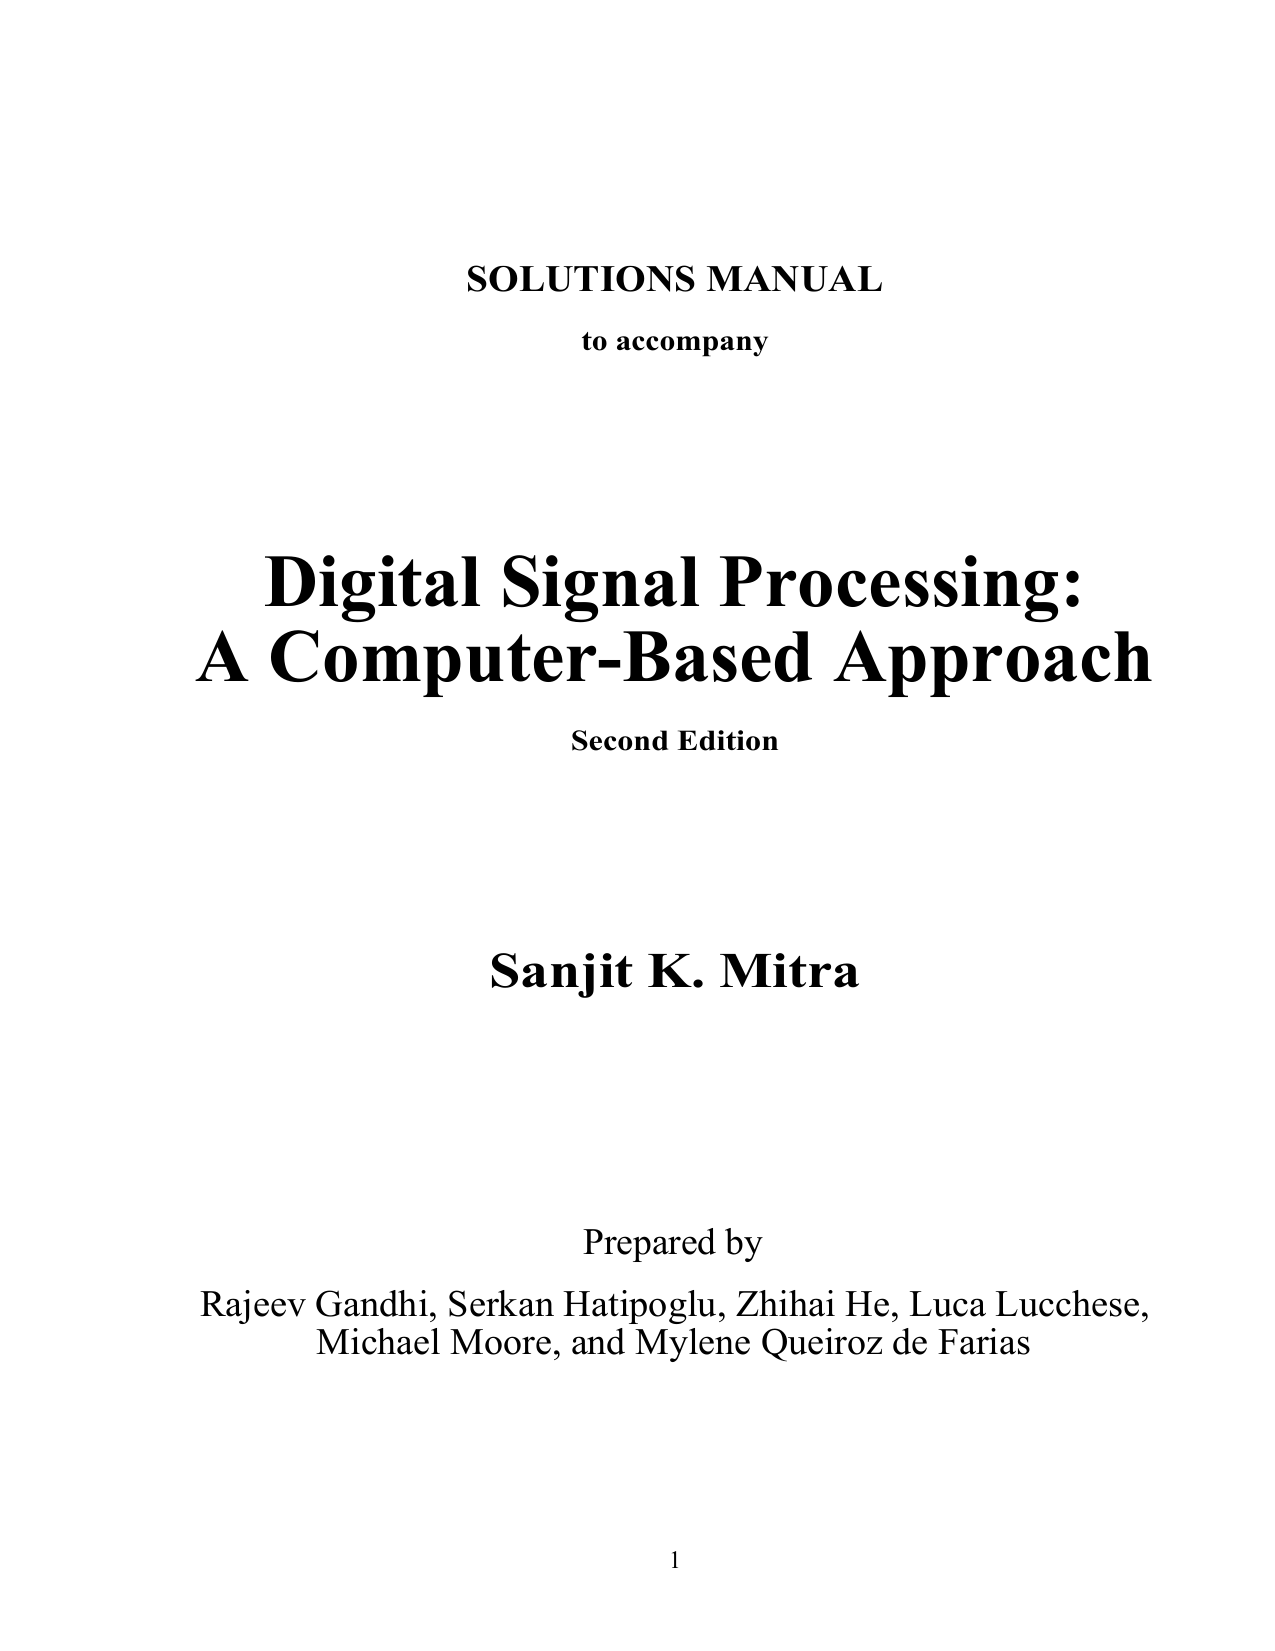 Digital signal processing 2nd mitra solution ElectroVolt.ir